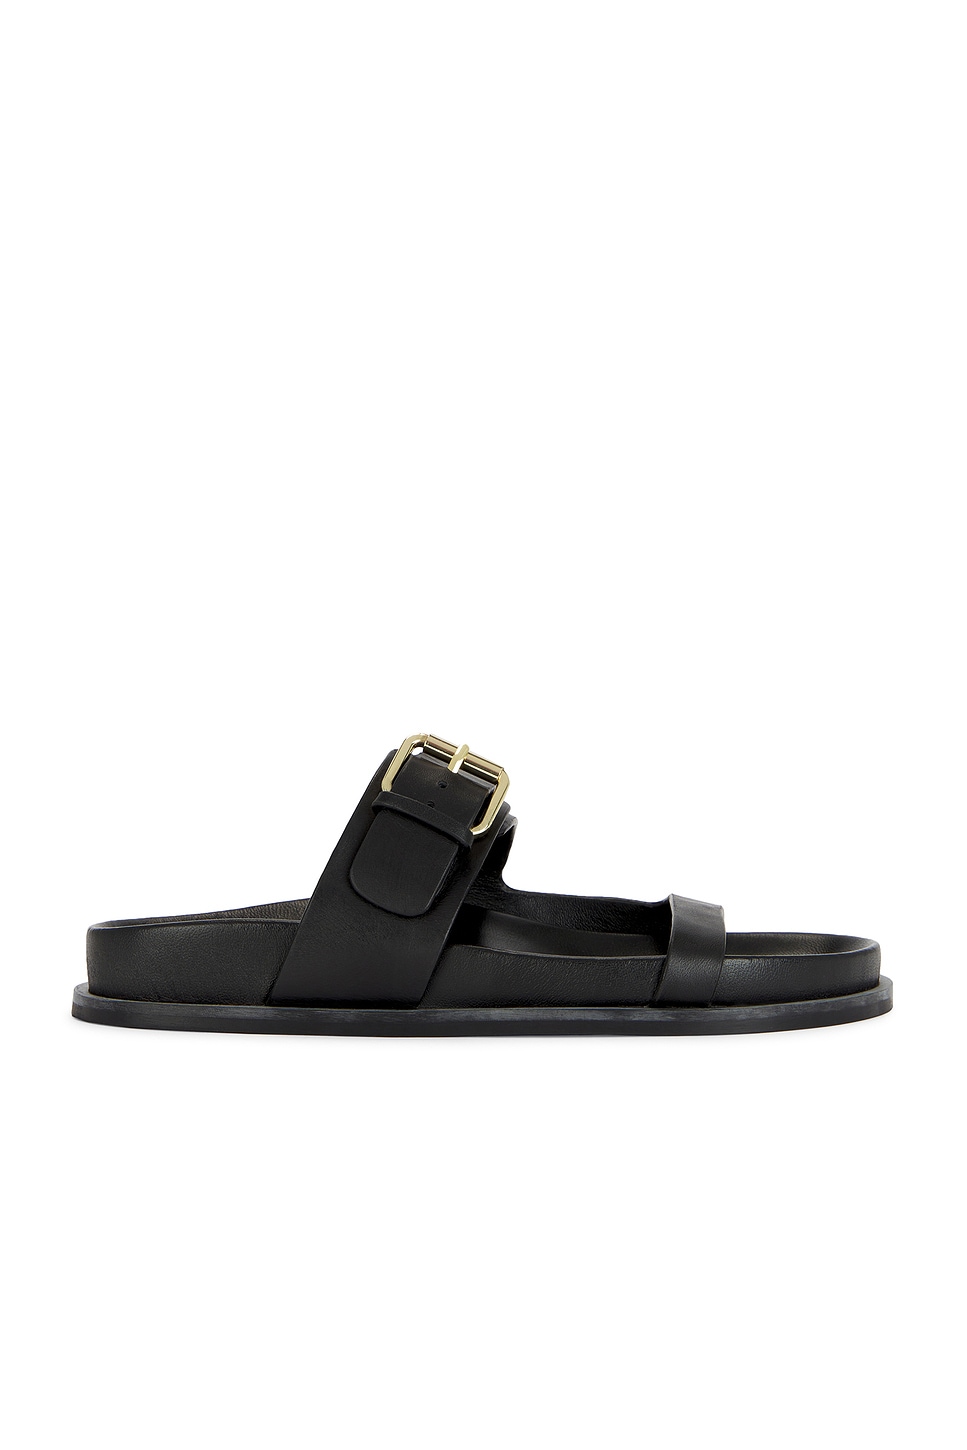 Image 1 of A.EMERY Prince Sandal in Black